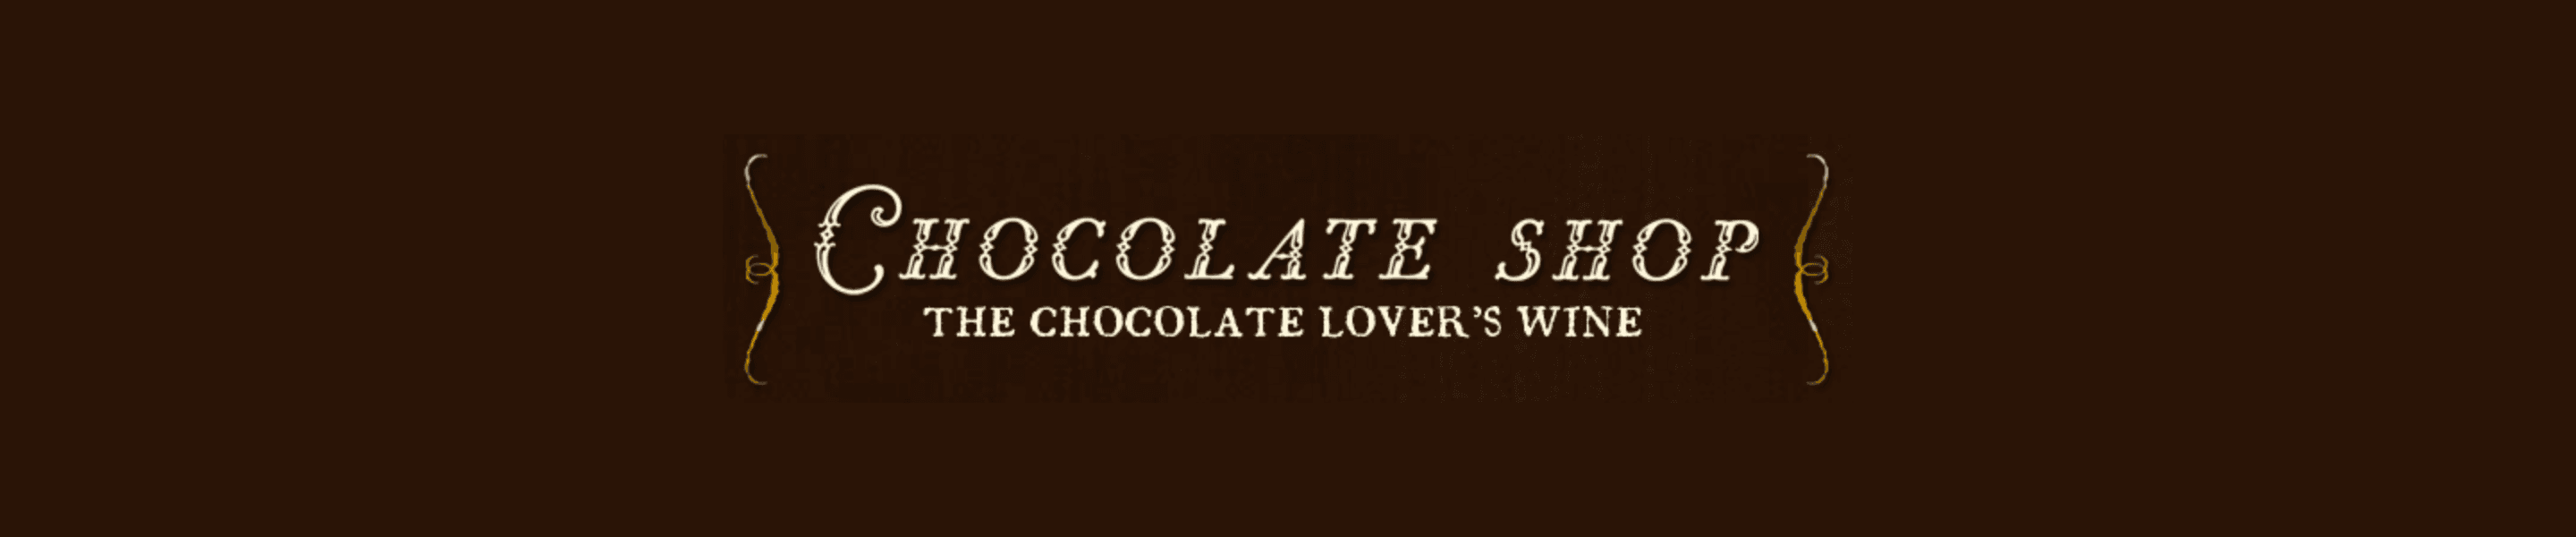 A category pioneer, Chocolate Shop has established itself as a sweet, everyday indulgence. With consistent consumer demand and valuable trade endorsements, Chocolate Ship is a simple, crowd-pleasing, single SKU proposition. 